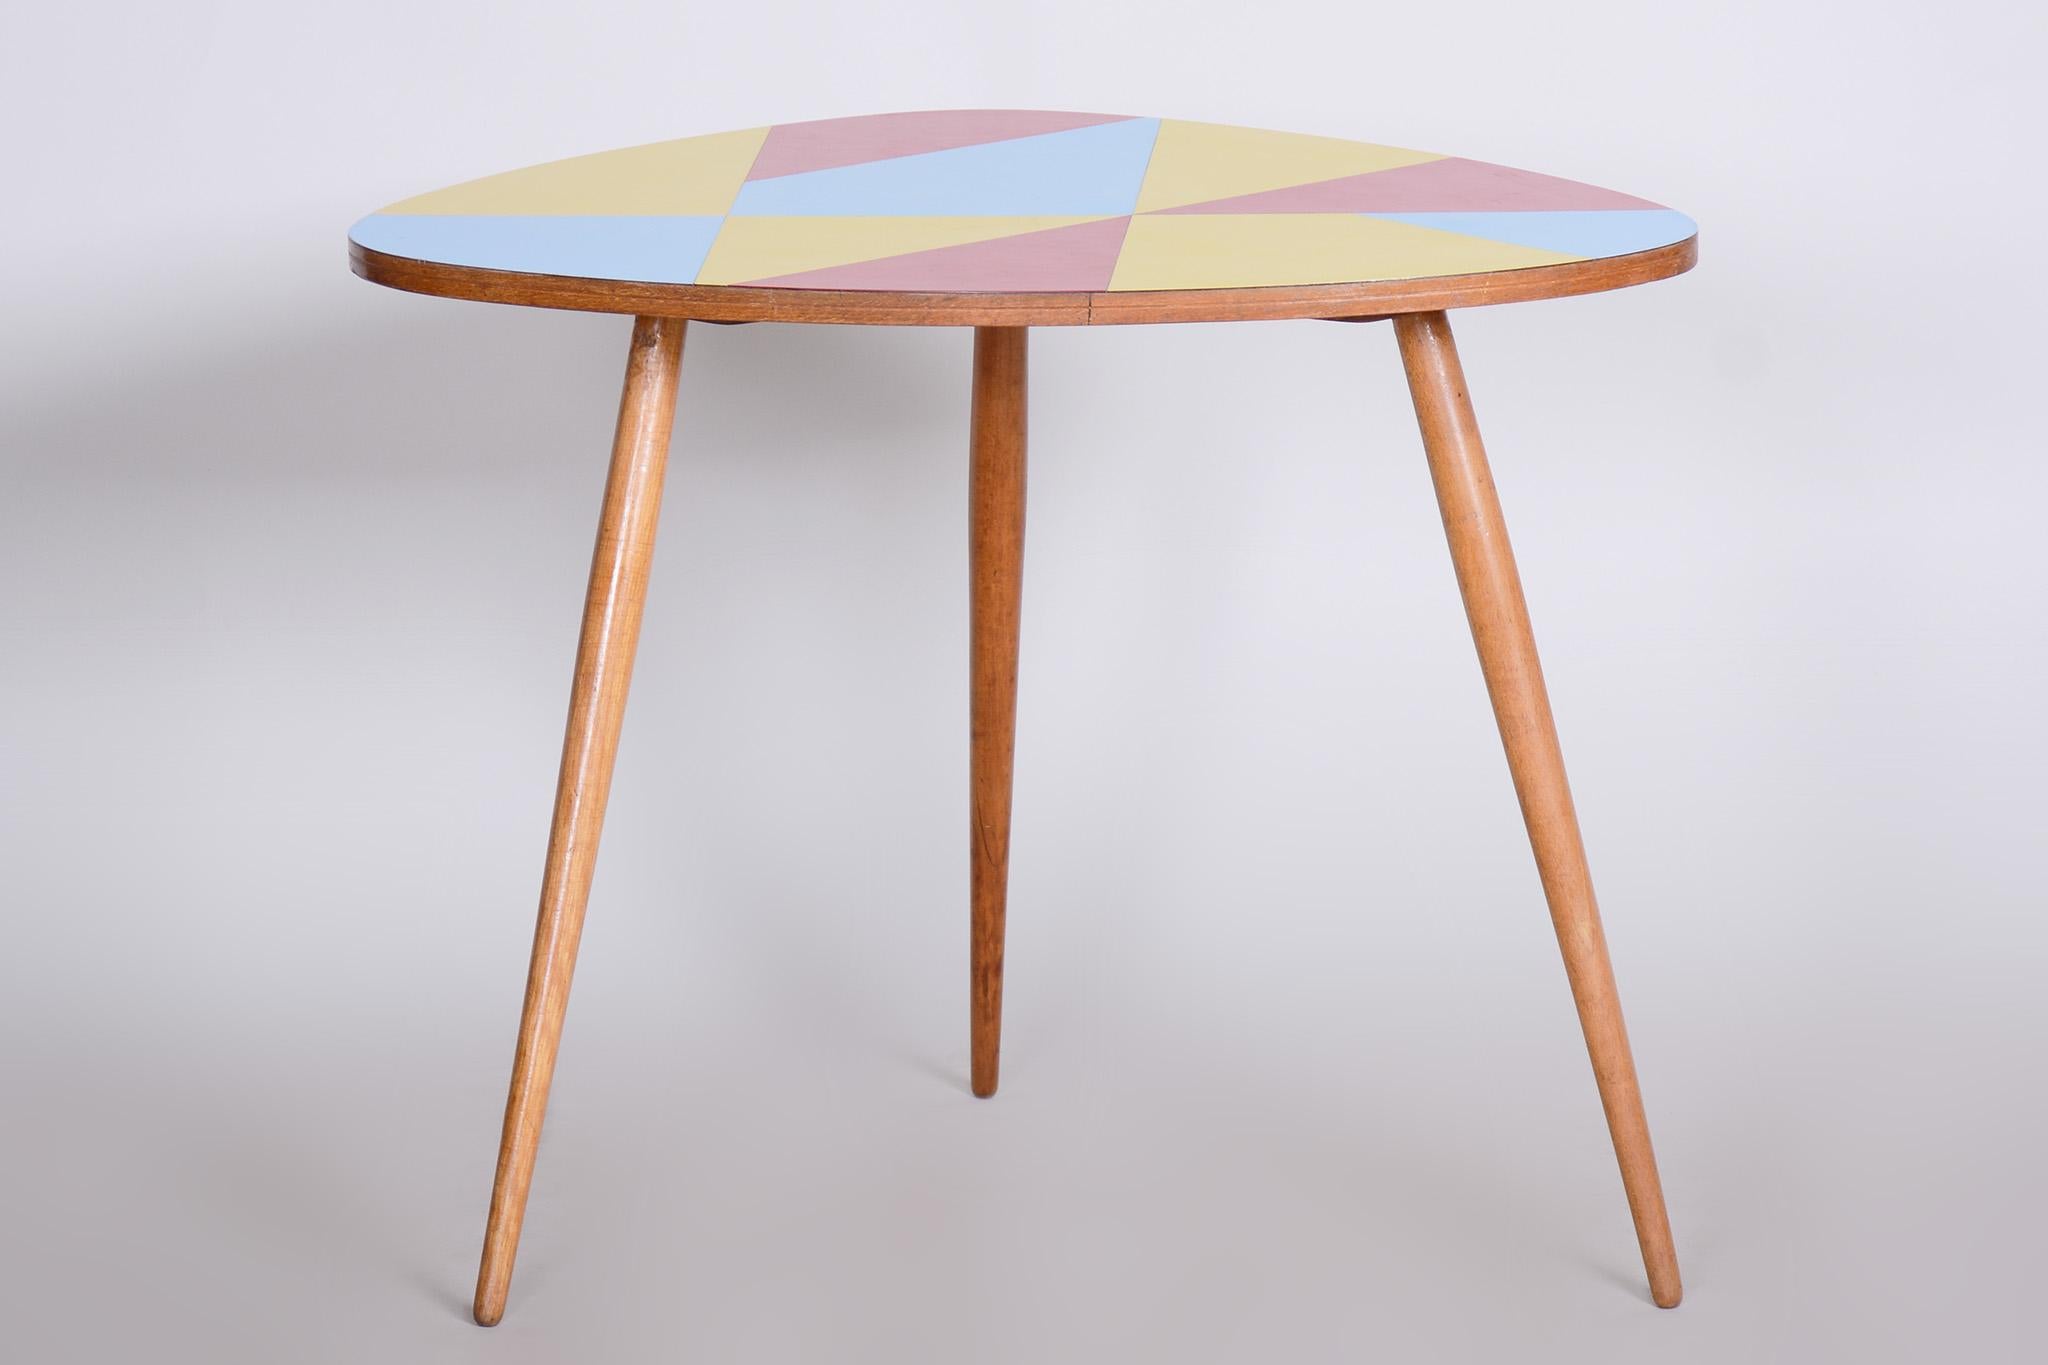 Mid-20th Century Small Mid Century Table, Made in Czechia, 1950s, Original Condition